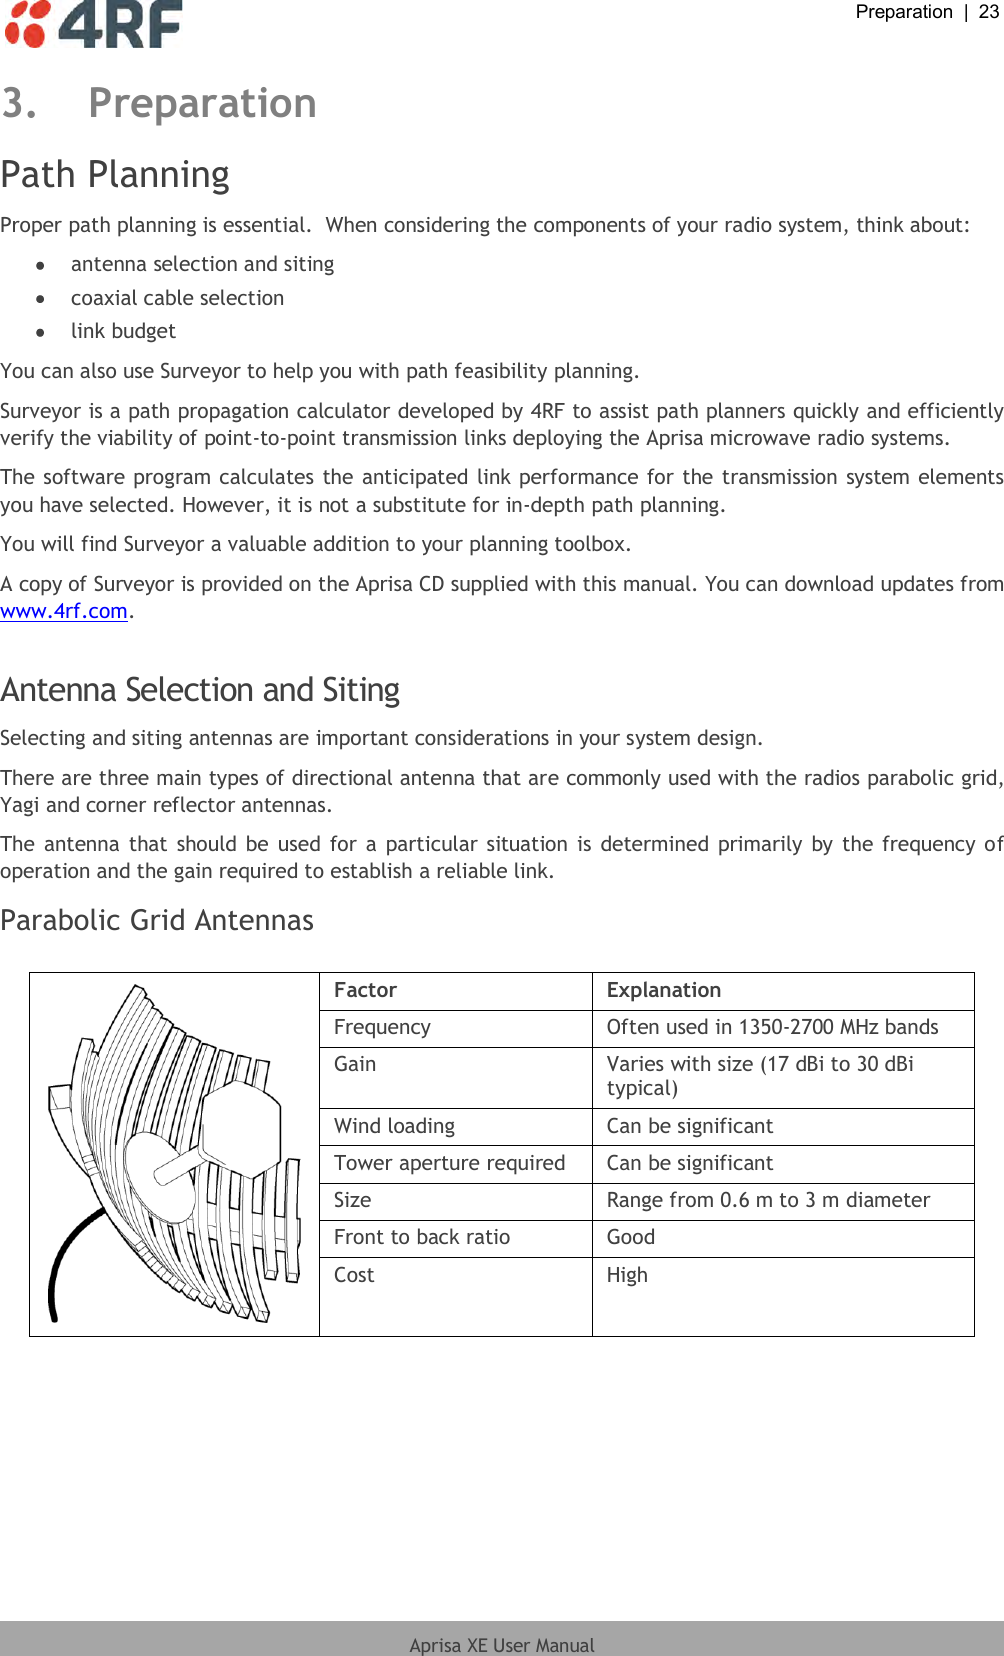  Preparation  |  23  Aprisa XE User Manual  3. Preparation Path Planning Proper path planning is essential.  When considering the components of your radio system, think about:  antenna selection and siting  coaxial cable selection  link budget You can also use Surveyor to help you with path feasibility planning. Surveyor is a path propagation calculator developed by 4RF to assist path planners quickly and efficiently verify the viability of point-to-point transmission links deploying the Aprisa microwave radio systems. The software program calculates the anticipated link performance for the transmission system elements you have selected. However, it is not a substitute for in-depth path planning. You will find Surveyor a valuable addition to your planning toolbox. A copy of Surveyor is provided on the Aprisa CD supplied with this manual. You can download updates from www.4rf.com.  Antenna Selection and Siting Selecting and siting antennas are important considerations in your system design. There are three main types of directional antenna that are commonly used with the radios parabolic grid, Yagi and corner reflector antennas. The antenna that should be used for a  particular situation is determined  primarily by the frequency of operation and the gain required to establish a reliable link. Parabolic Grid Antennas   Factor Explanation Frequency Often used in 1350-2700 MHz bands Gain Varies with size (17 dBi to 30 dBi typical) Wind loading Can be significant Tower aperture required Can be significant Size Range from 0.6 m to 3 m diameter Front to back ratio Good Cost High  